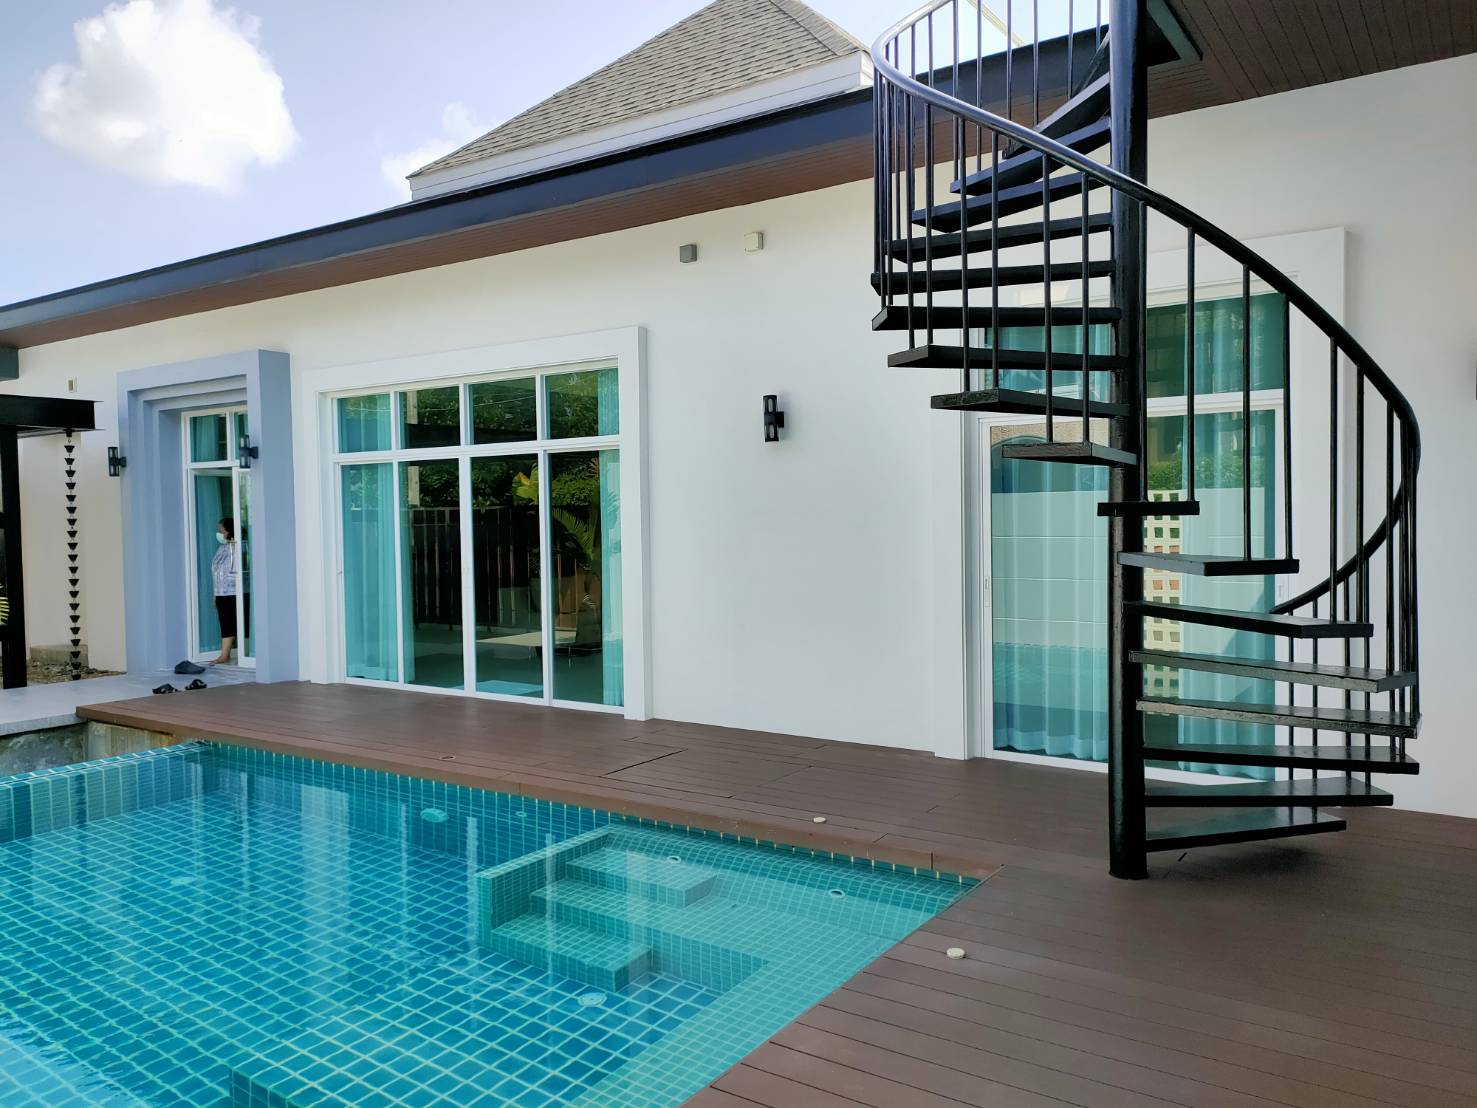 PRIVATE POOL VILLA 3 BED IN CHERNGTALY